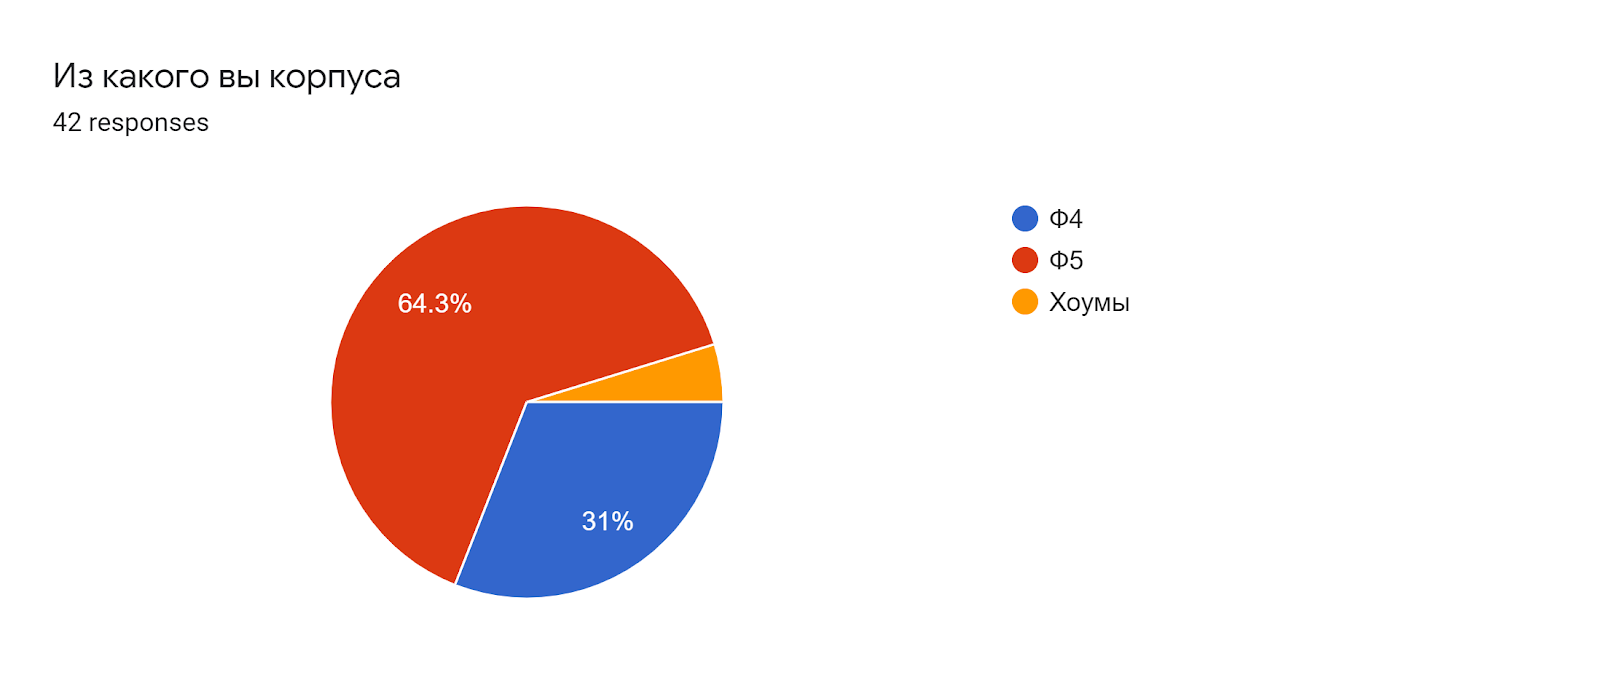 Forms response chart. Question title: Из какого вы корпуса. Number of responses: 42 responses.